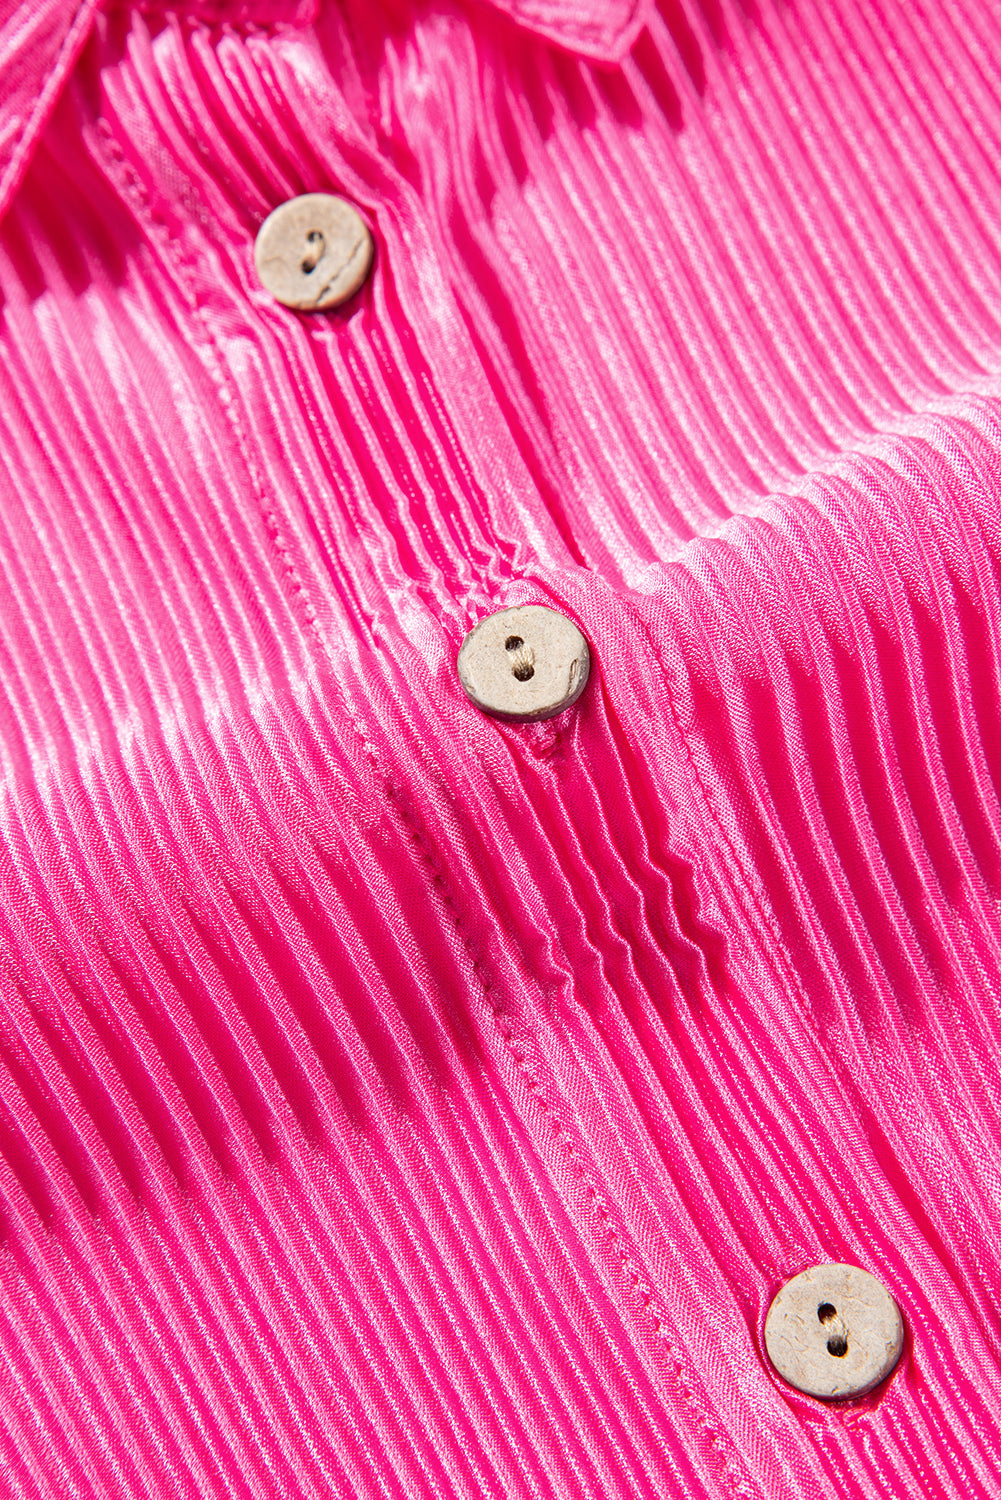 Blue Zone Planet |  Bright Pink Satin Pleated Short Sleeve Shirt Blue Zone Planet